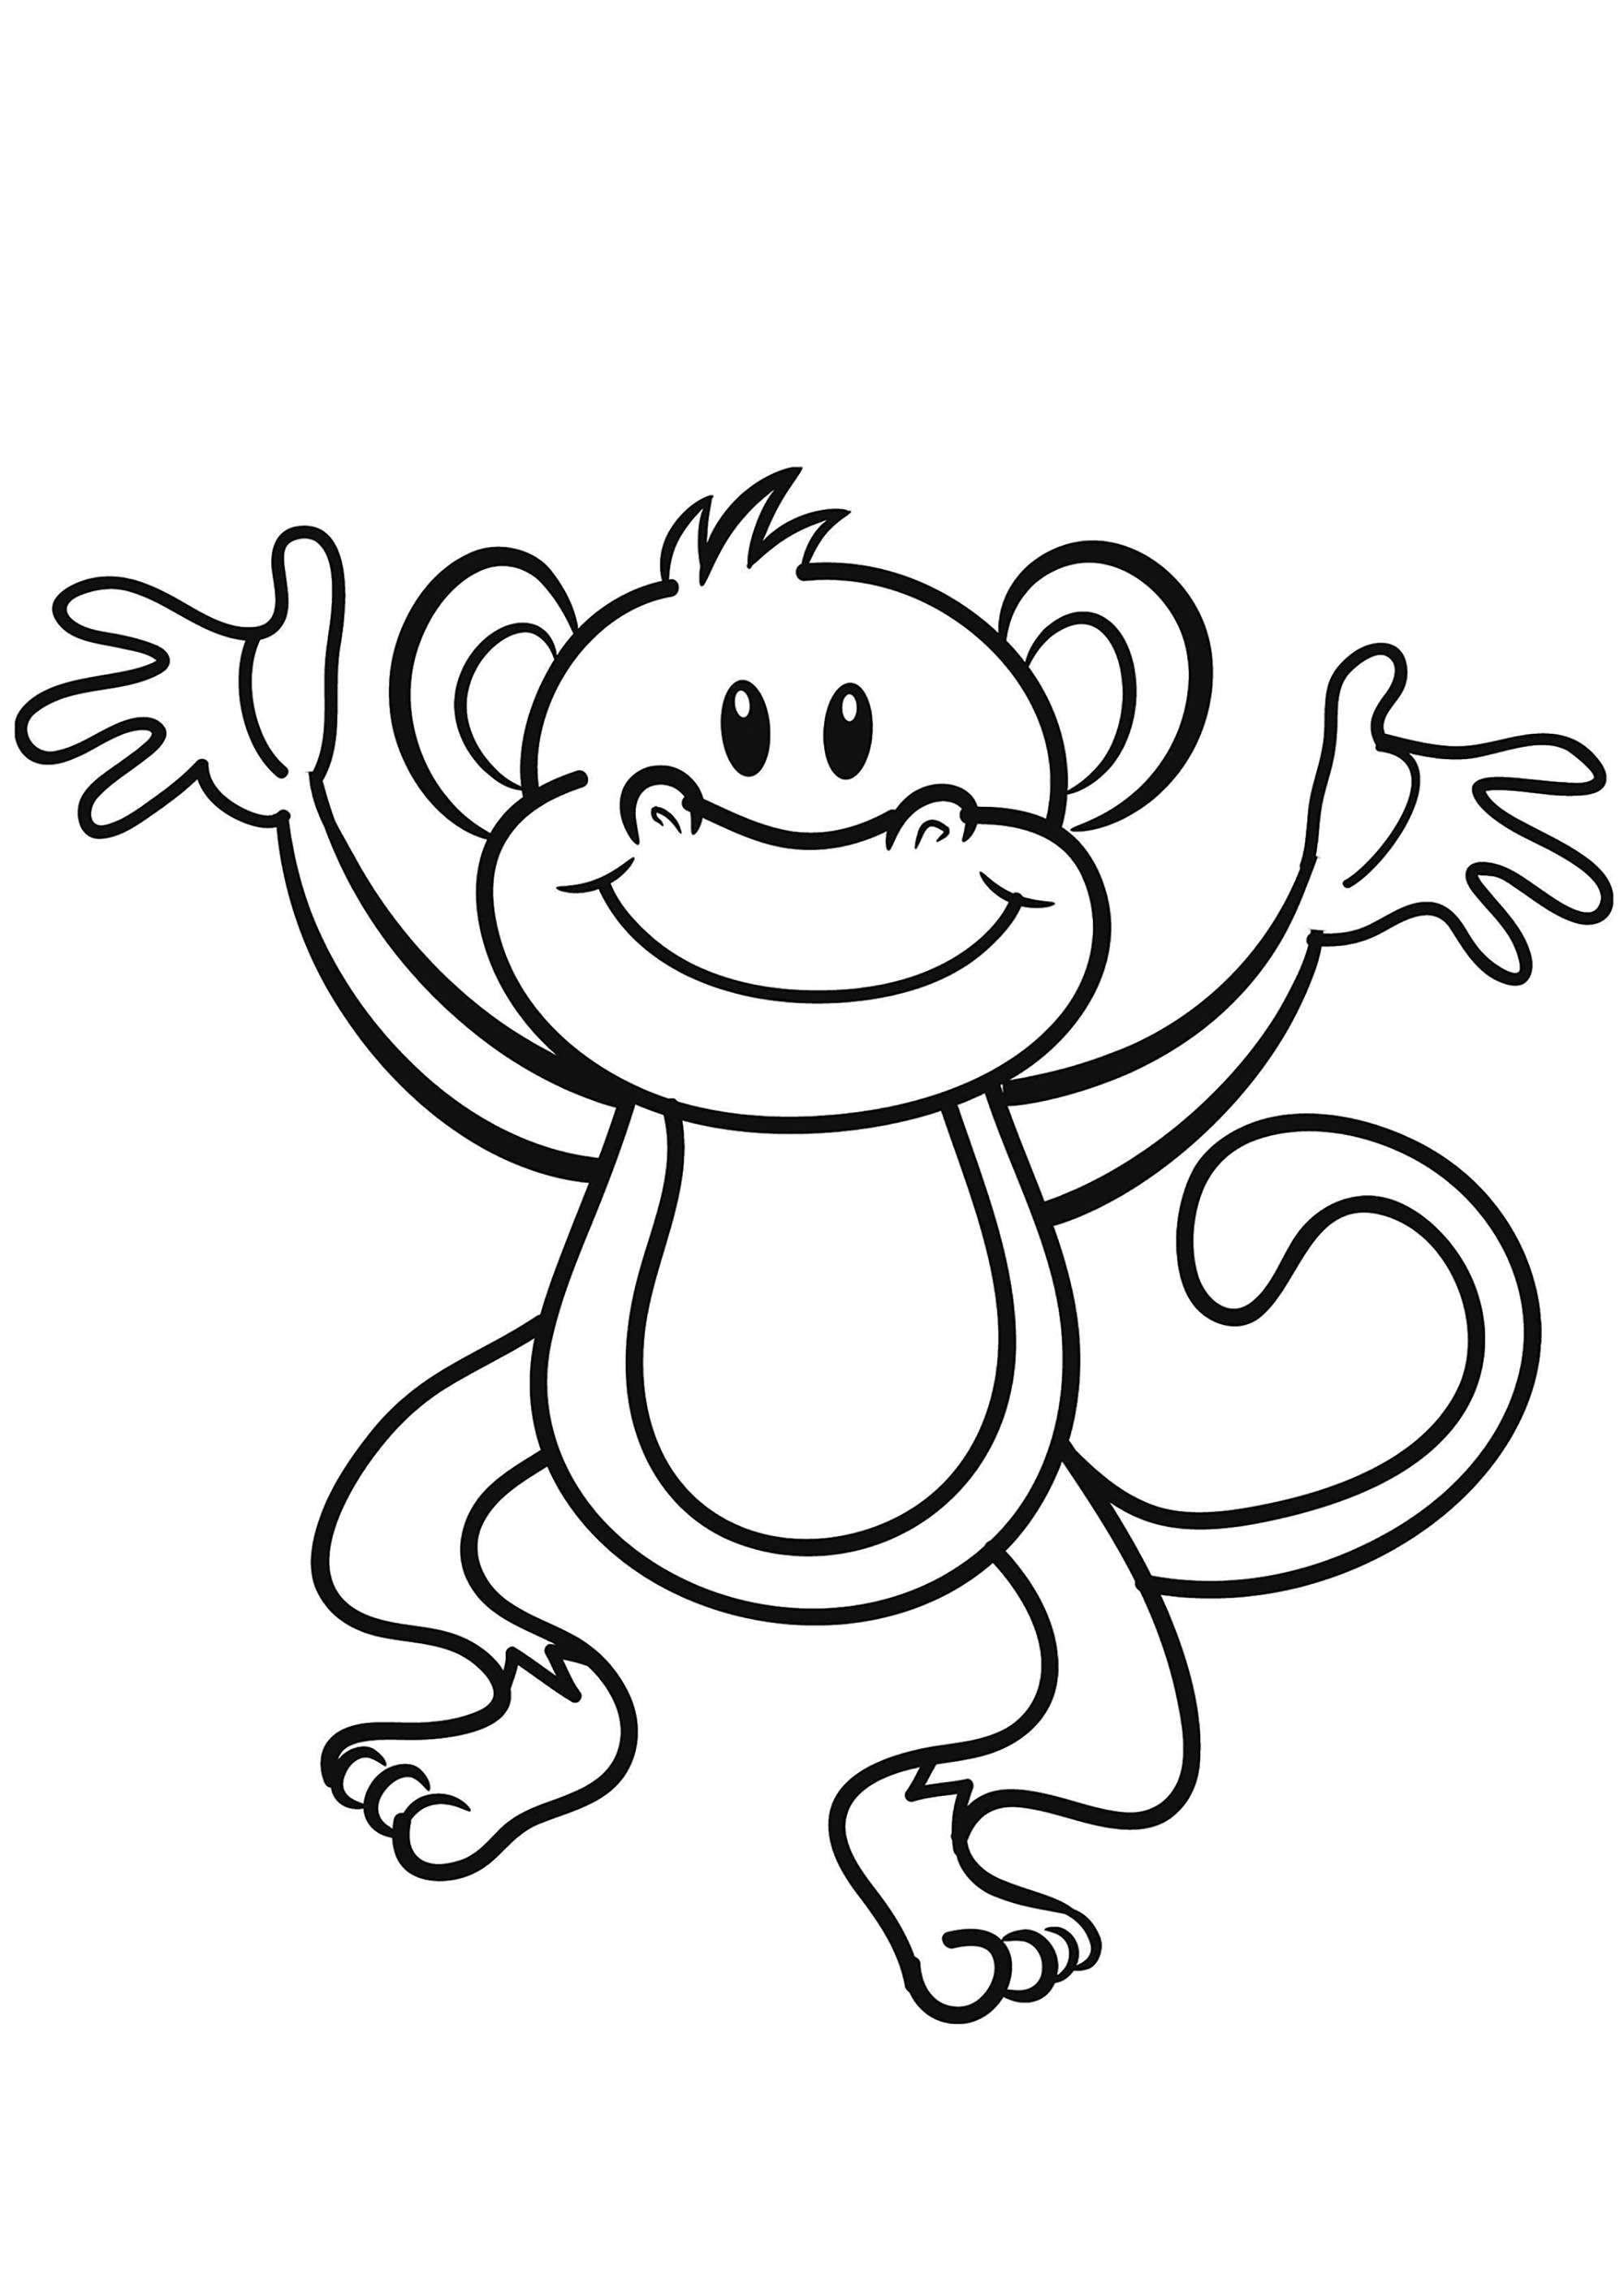 How to Draw a Monkey in 12 Easy Steps - VerbNow